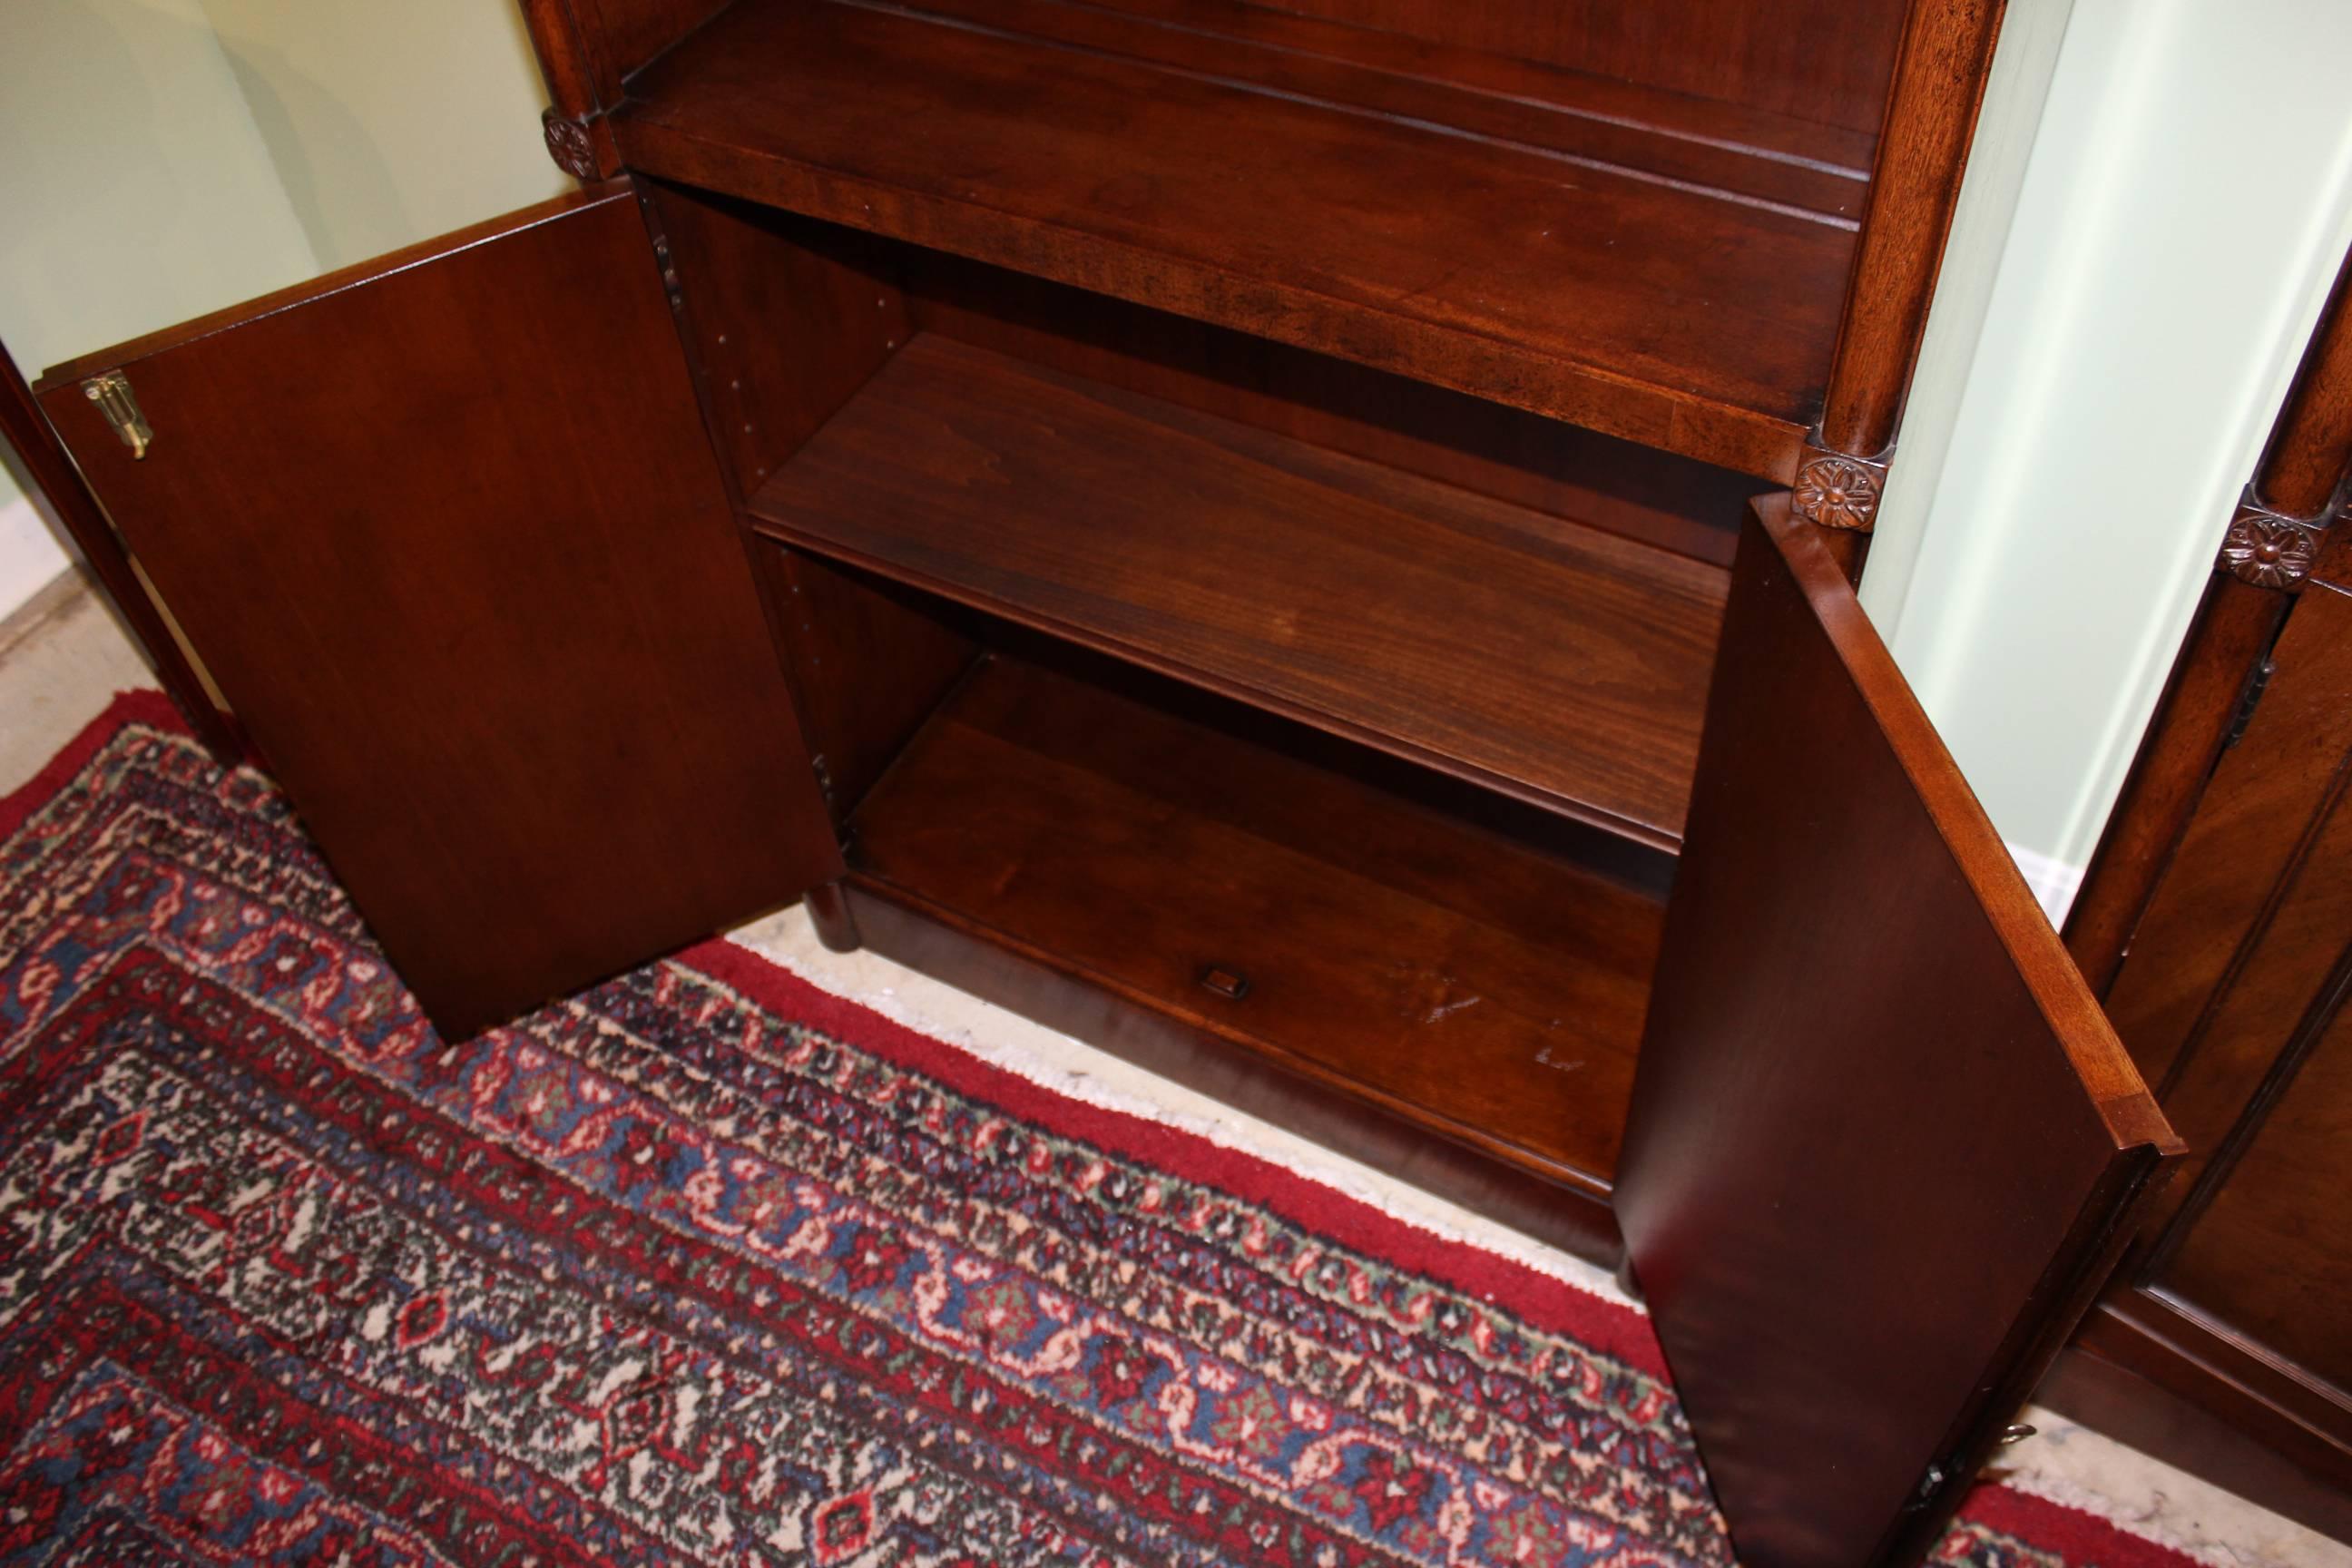 Regency Pair of Mahogany Kaplan Furniture Beacon Hill Arched Bookcases or China Cabinets